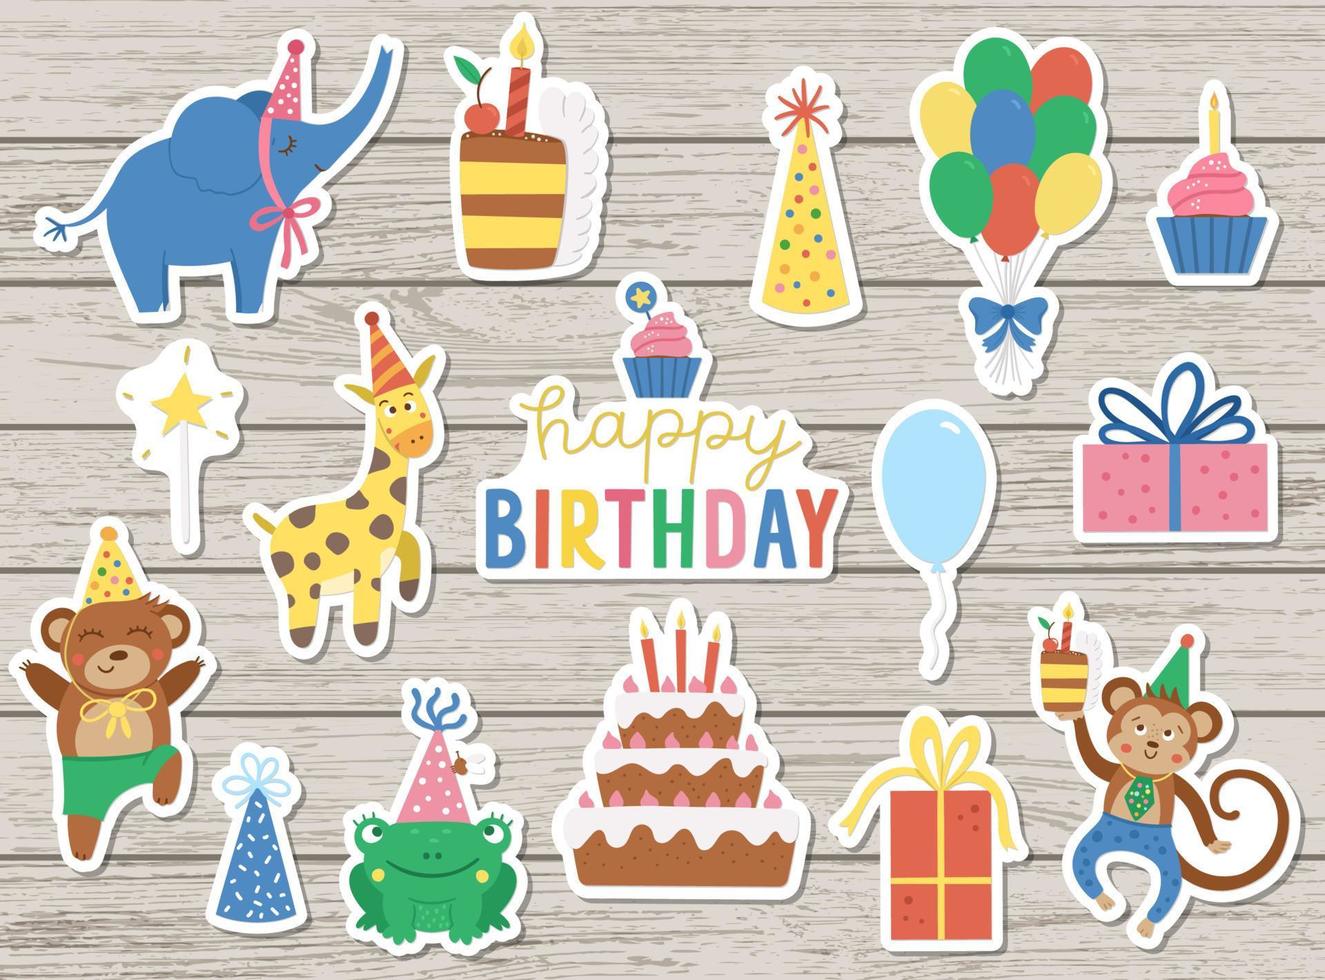 Set of cute cheerful stickers with animals in party hats on wooden background. Birthday party celebration clipart collection. Vector holiday pack with bright present, cake with candles, balloon